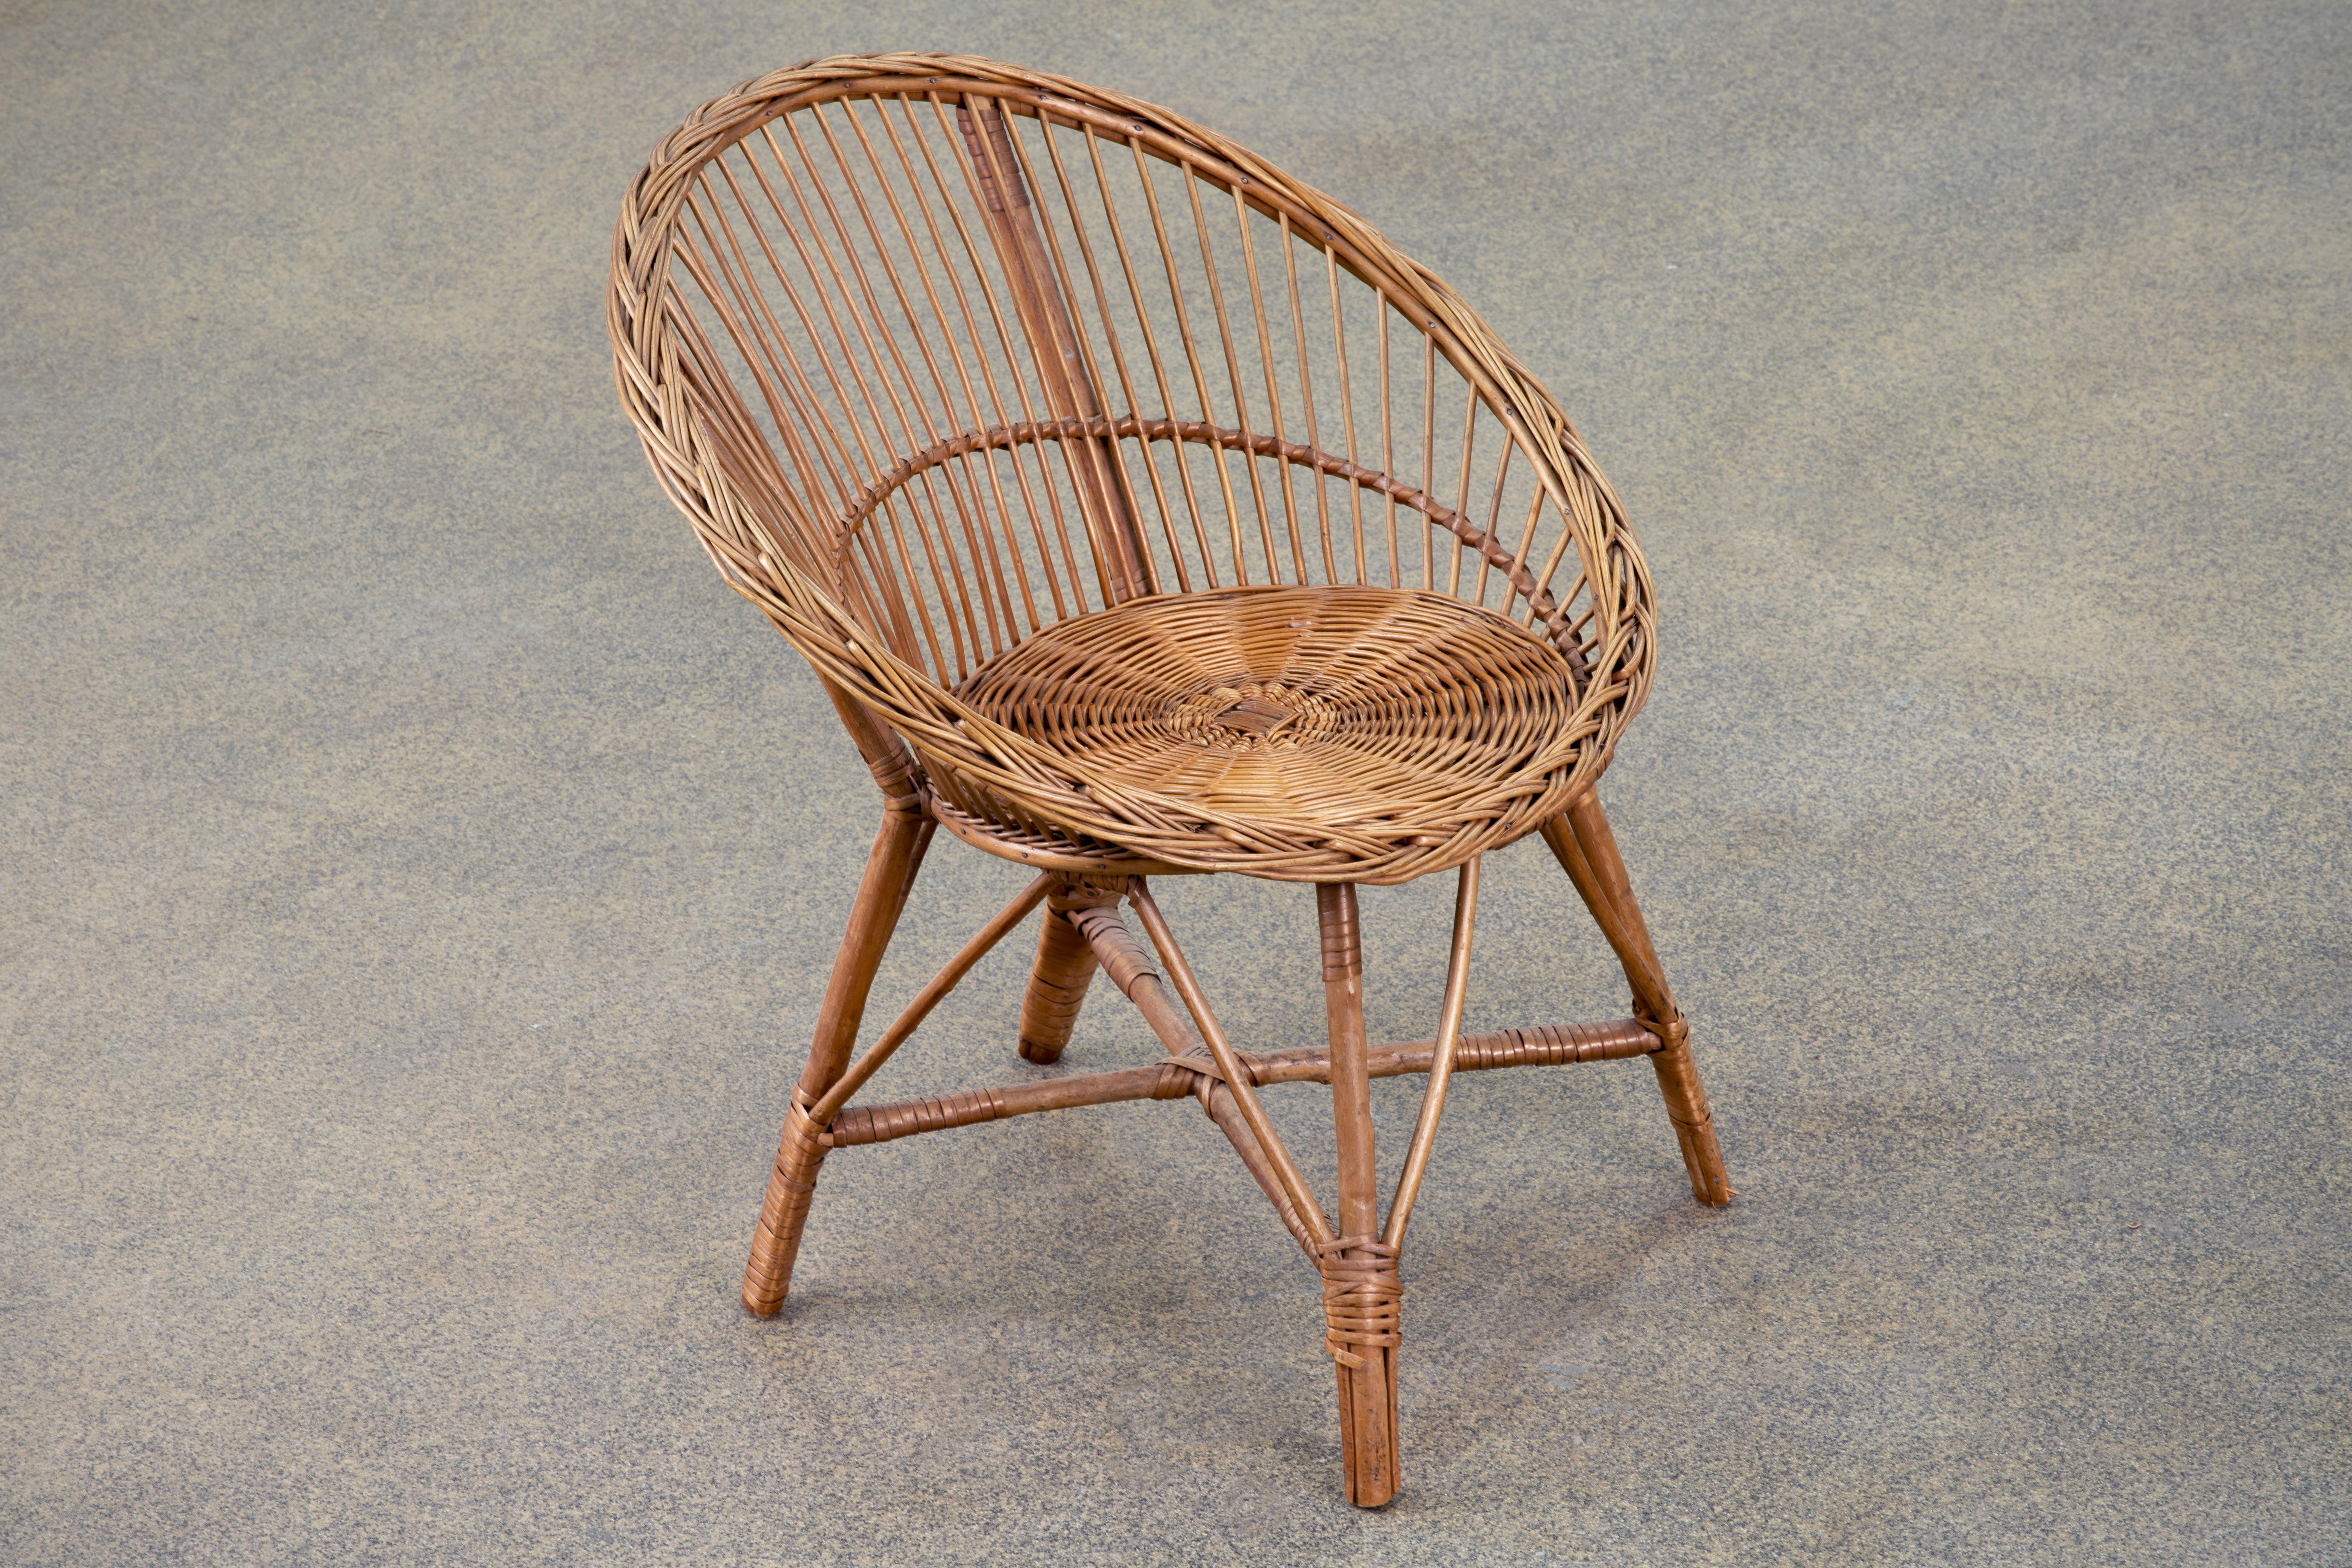 1960s oversized bamboo rattan lounge chairs Handmade in the French Riviera organic modern style. The chairs feature a large bent rattan frame fitted with Silky blue cushions. Very comfortable with excellent joinery and craftsmanship. Could also be